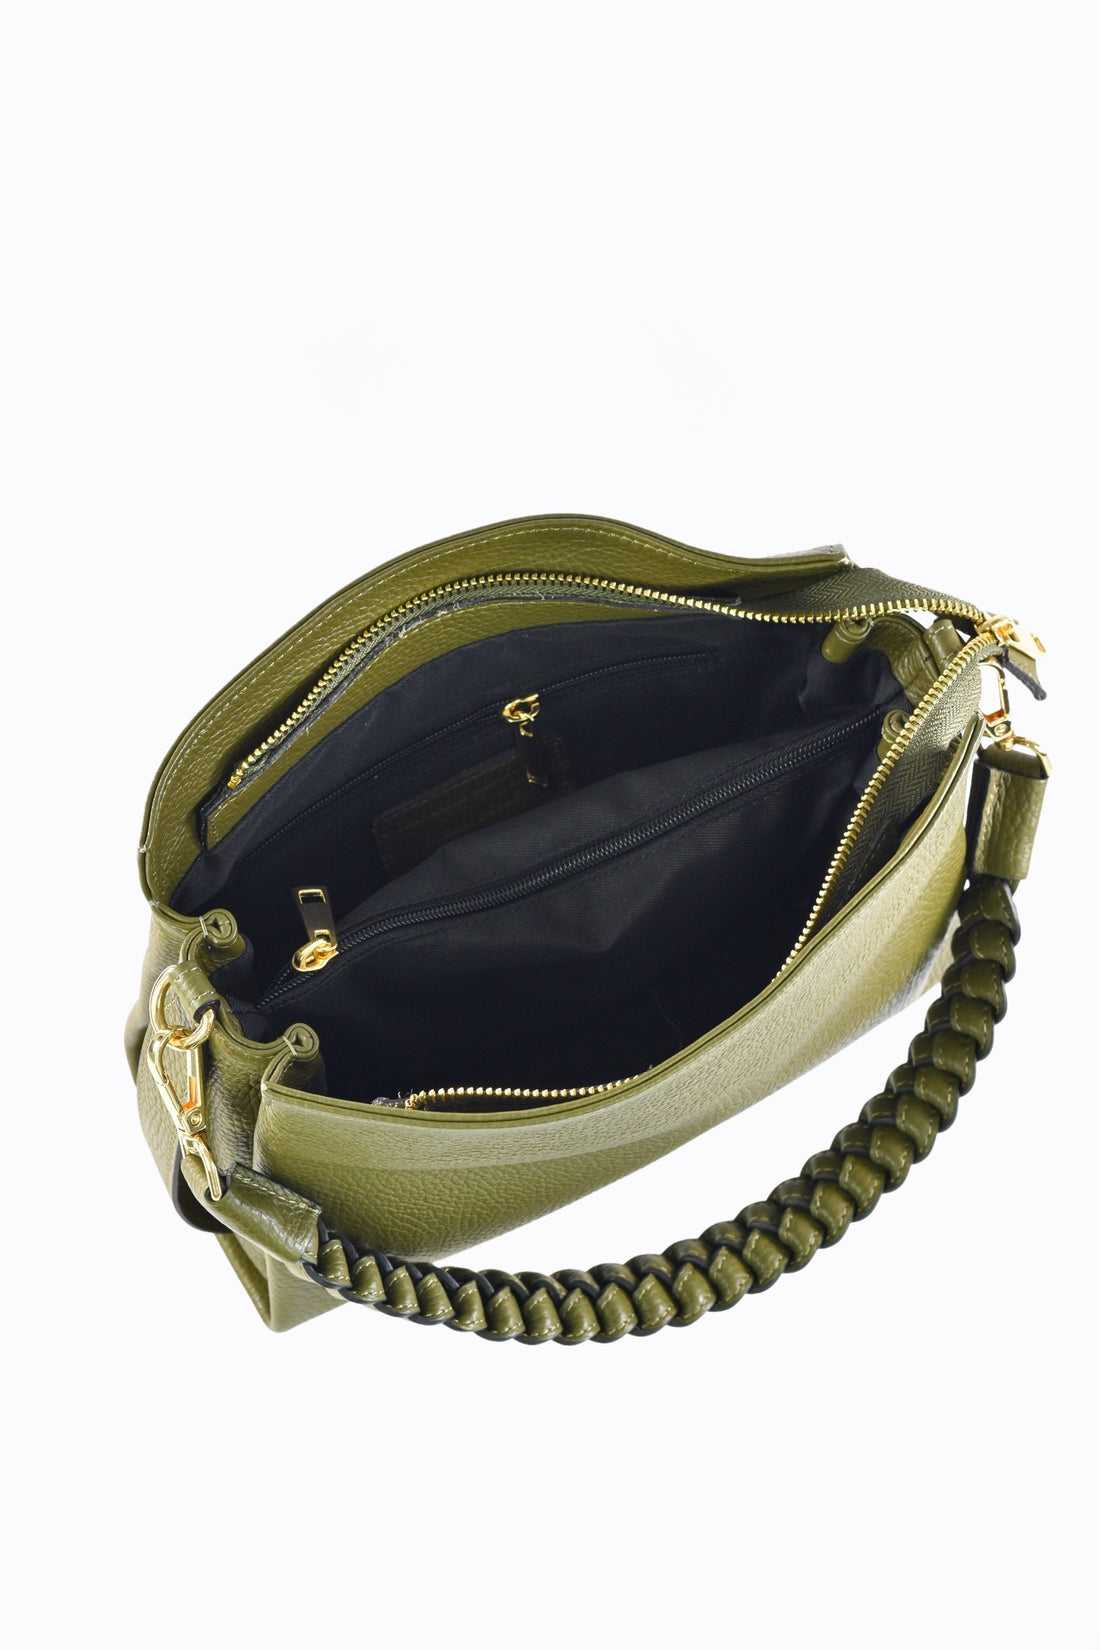 Braid Micro bag in Olive Green Dollar leather